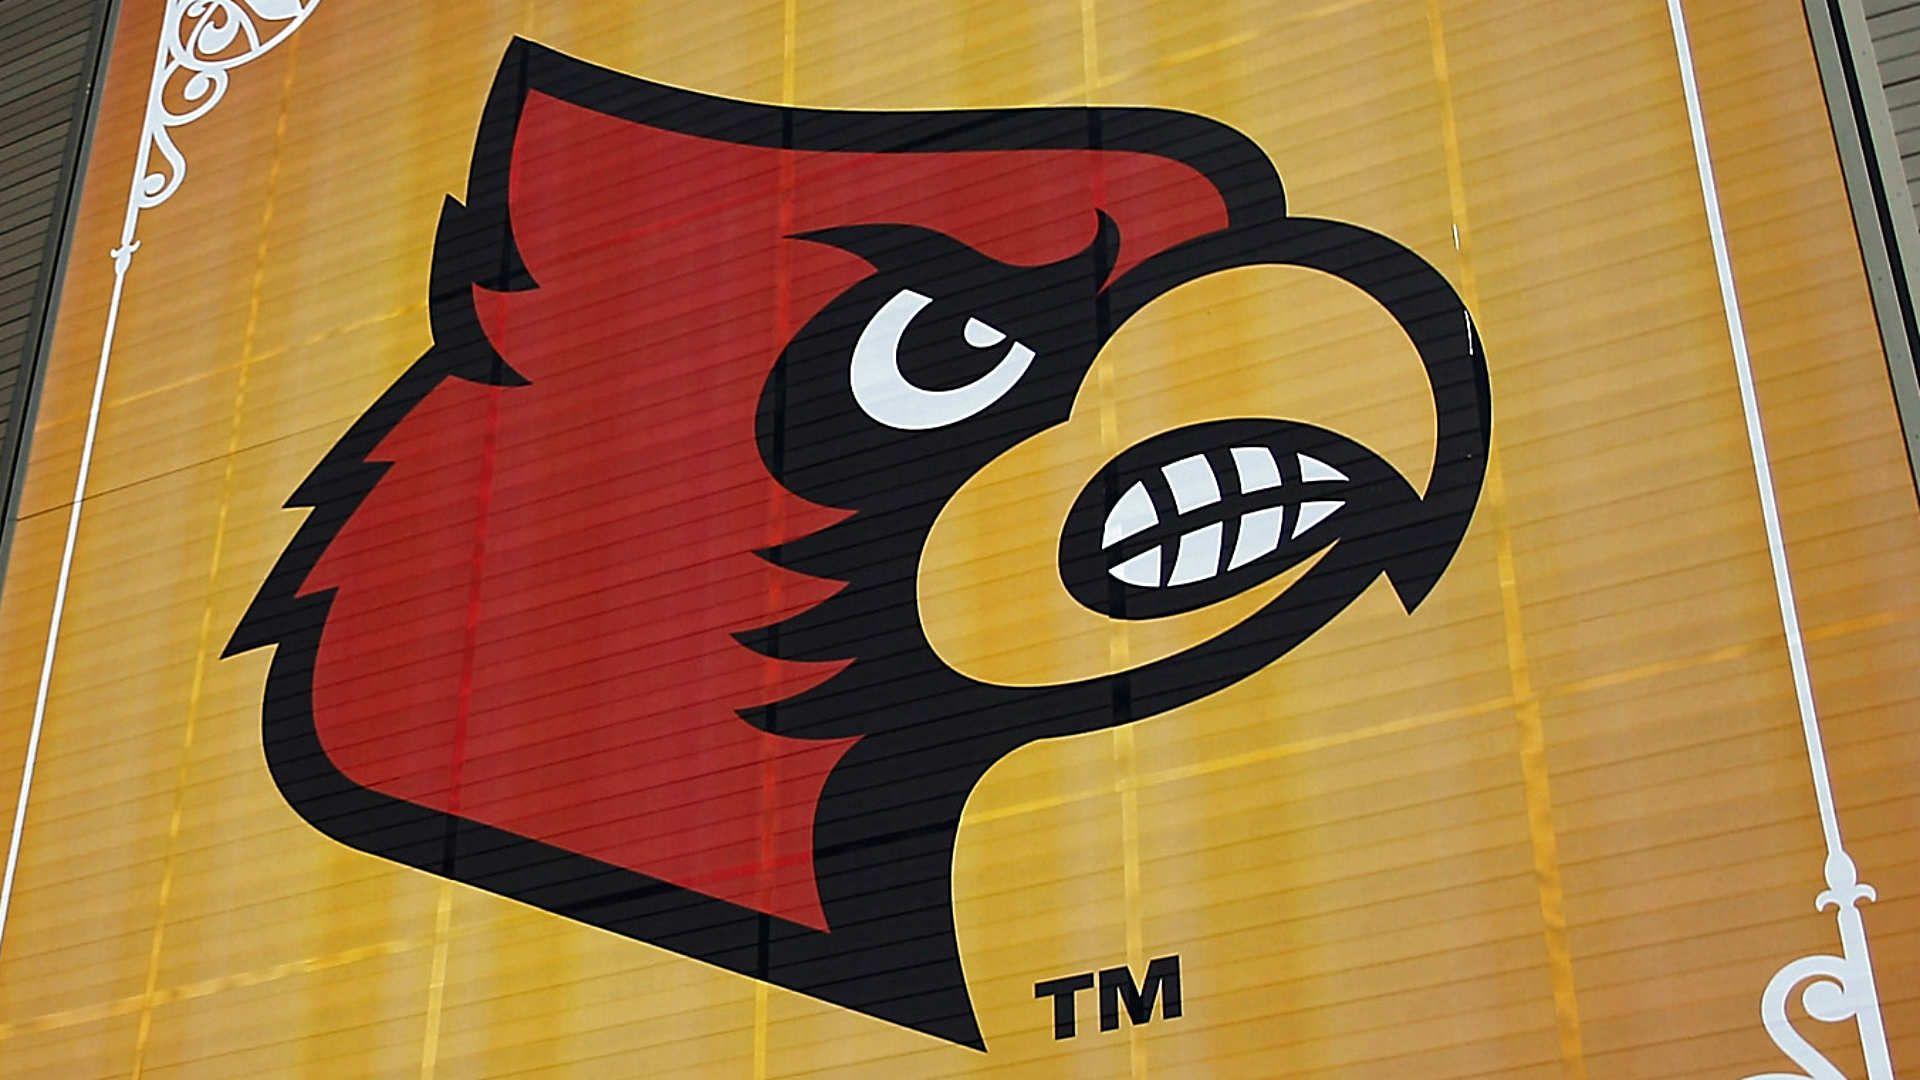 U of L Basketball Logo - Former Louisville players acknowledge stripper parties, admit to